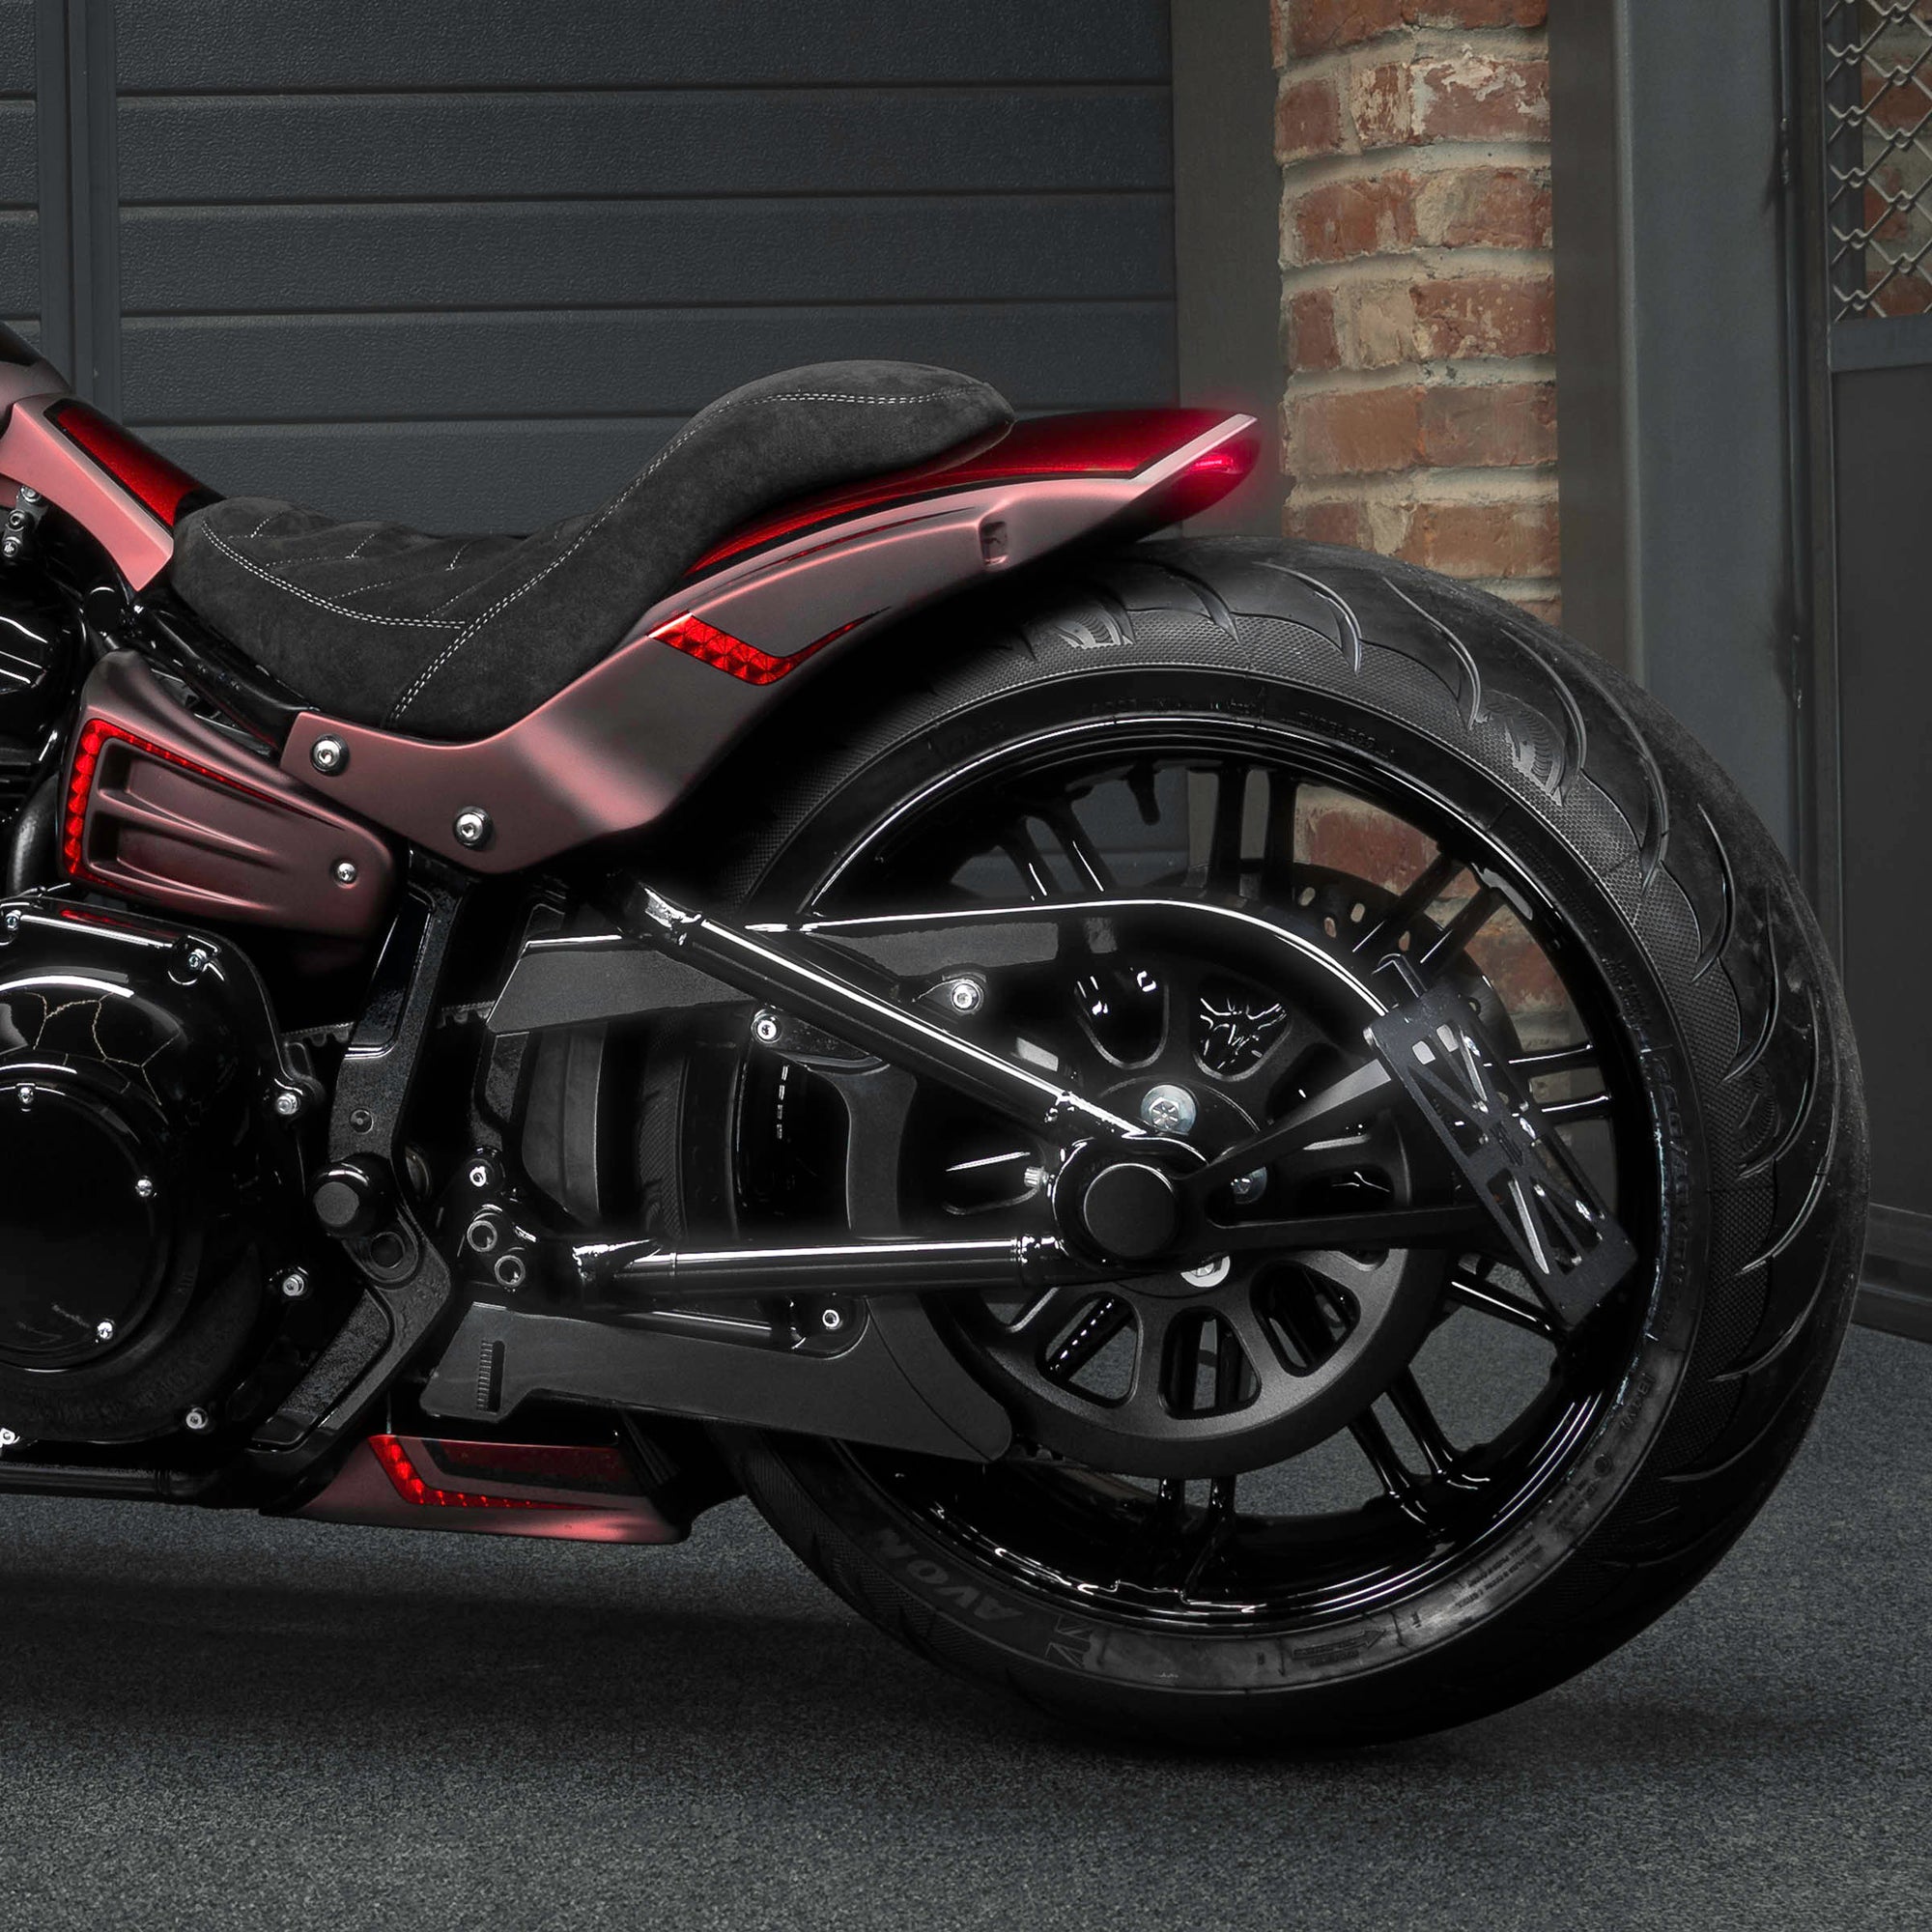 Zoomed Harley Davidson Breakout motorcycle with Killer Custom parts from the side in a modern garage